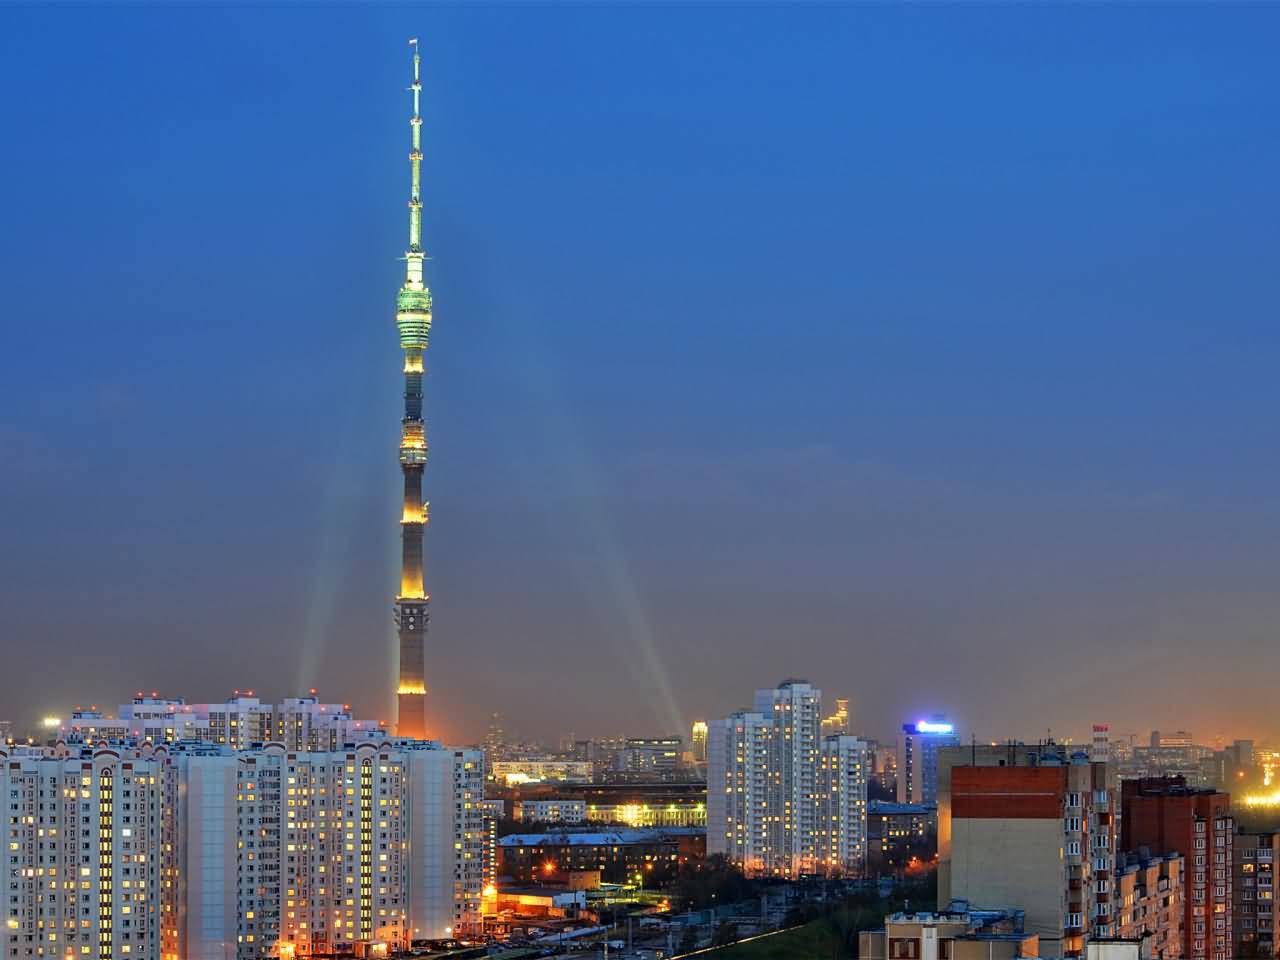 Full View Of Ostankino TV Tower In Moscow